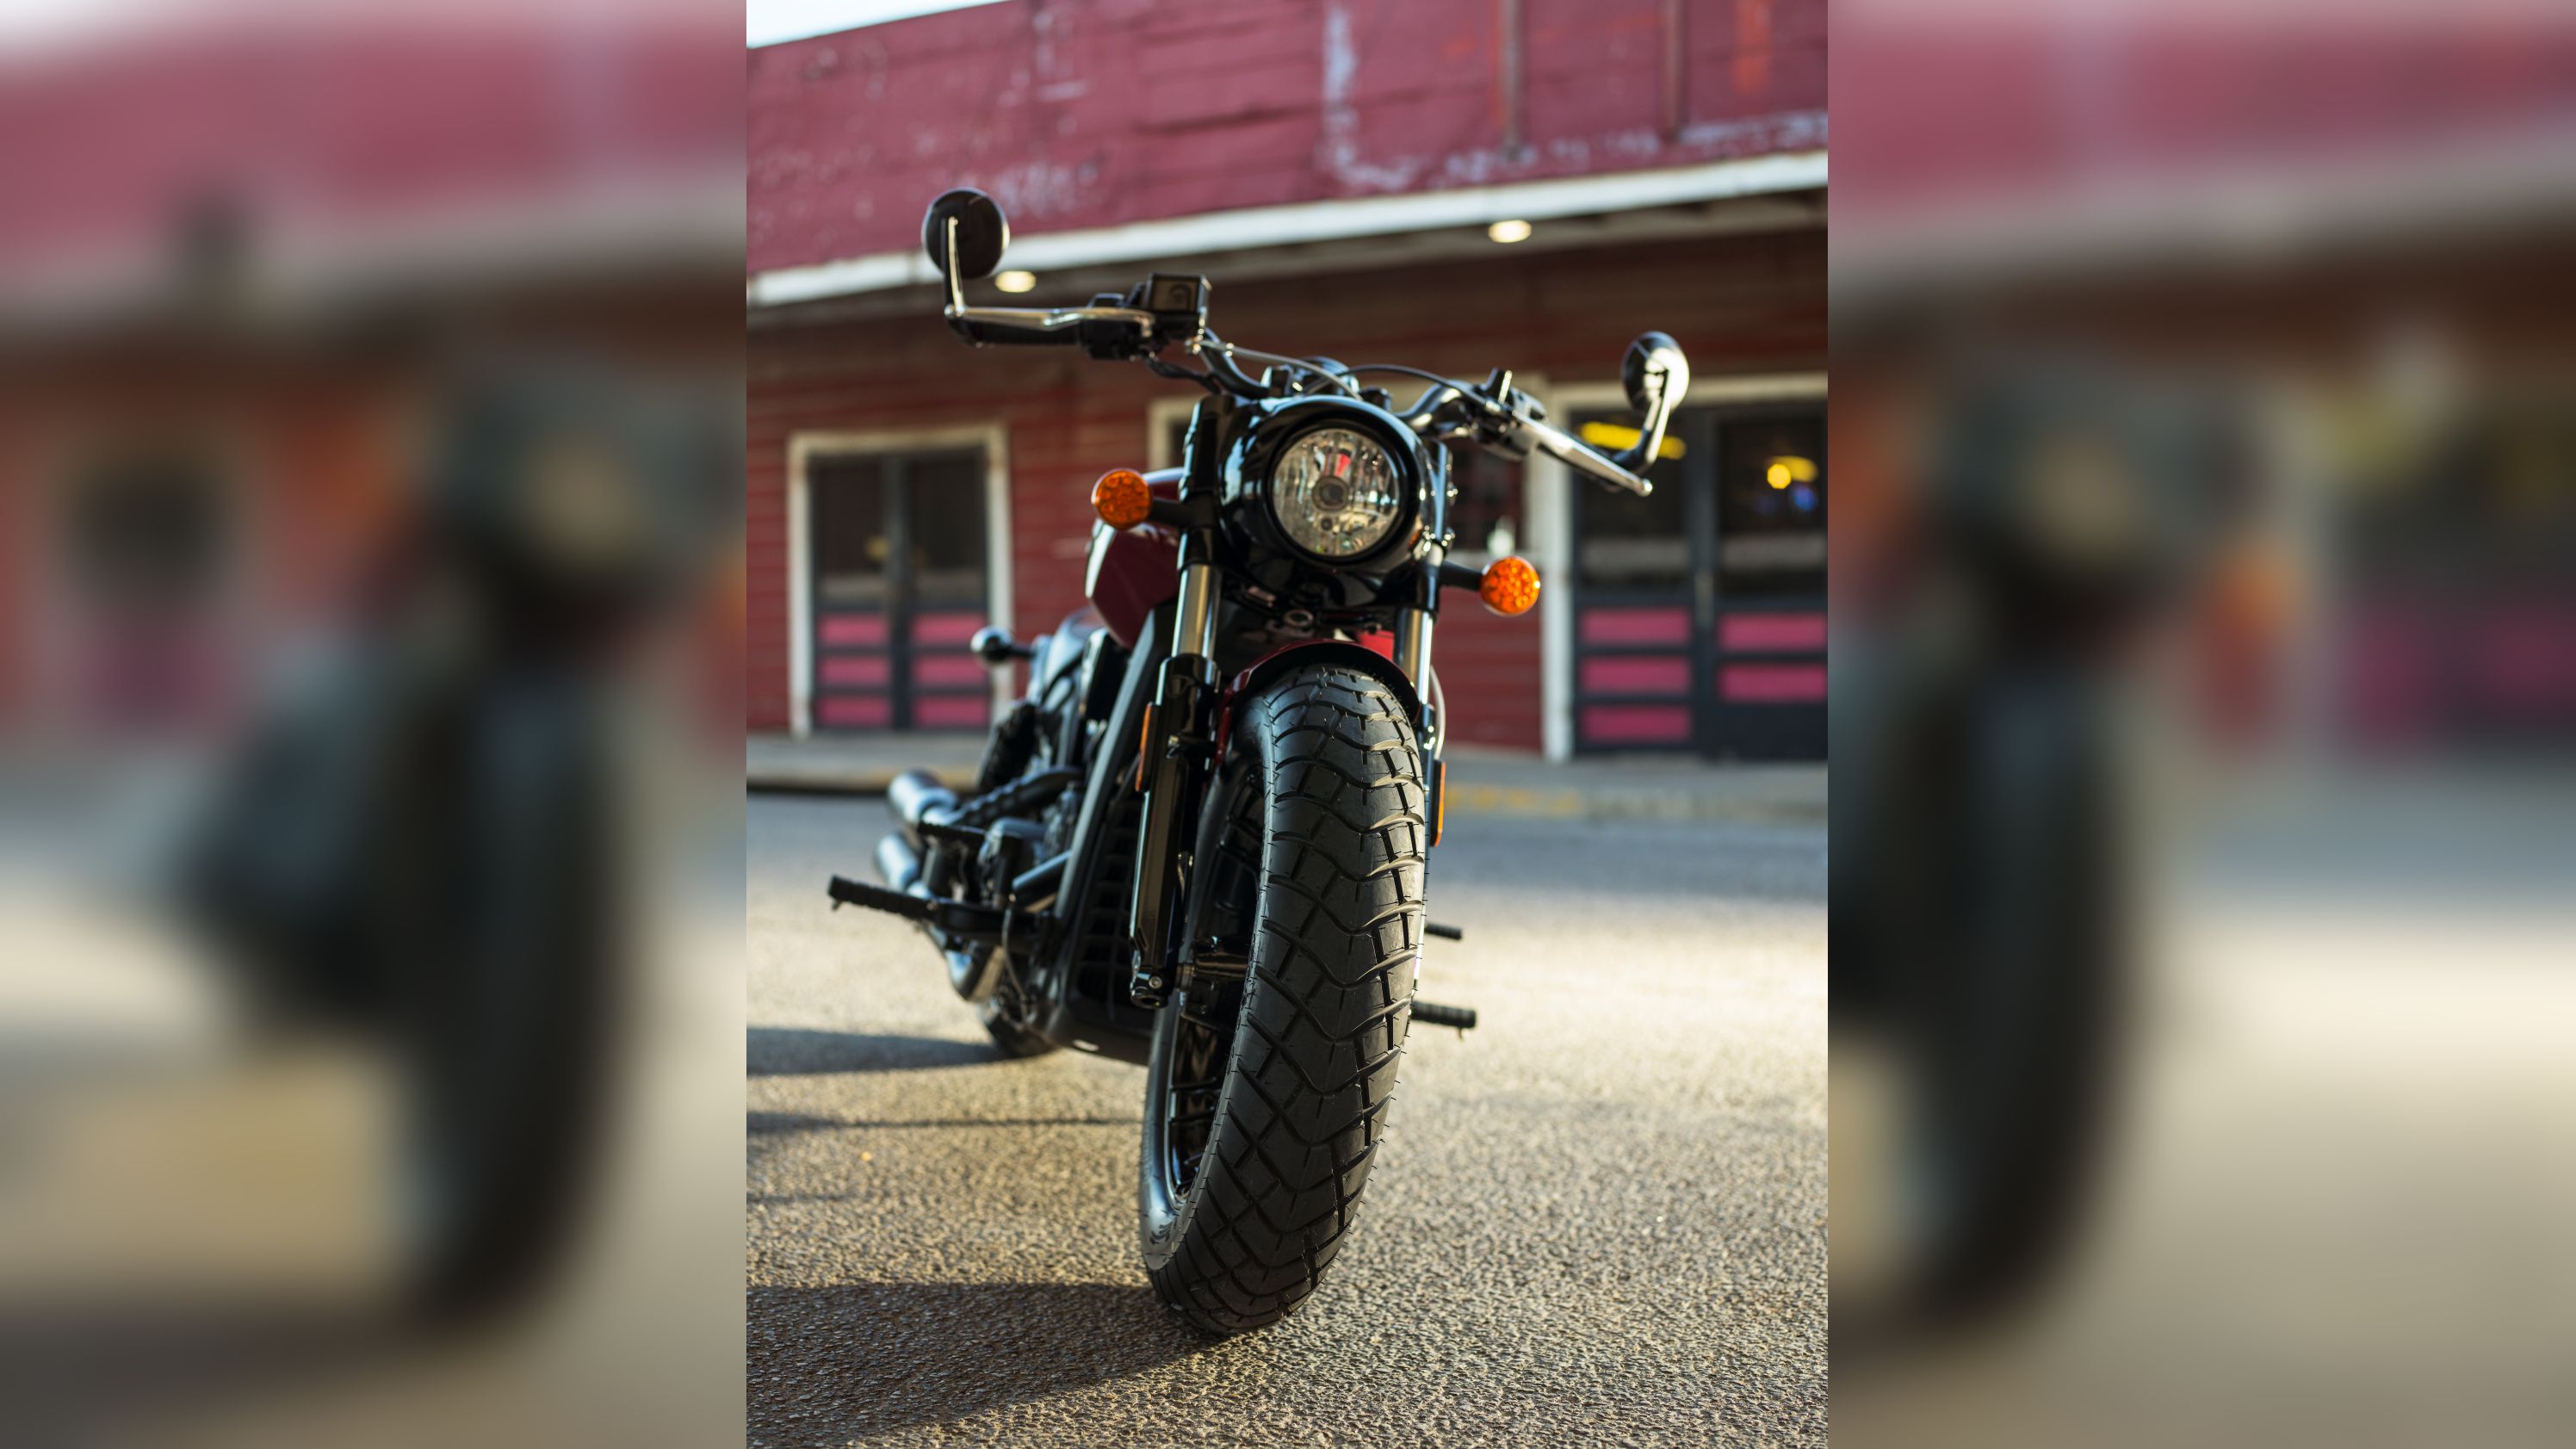 2018 Indian Motorcycles Scout Bobber - How Does It Stack Up To The Competition?